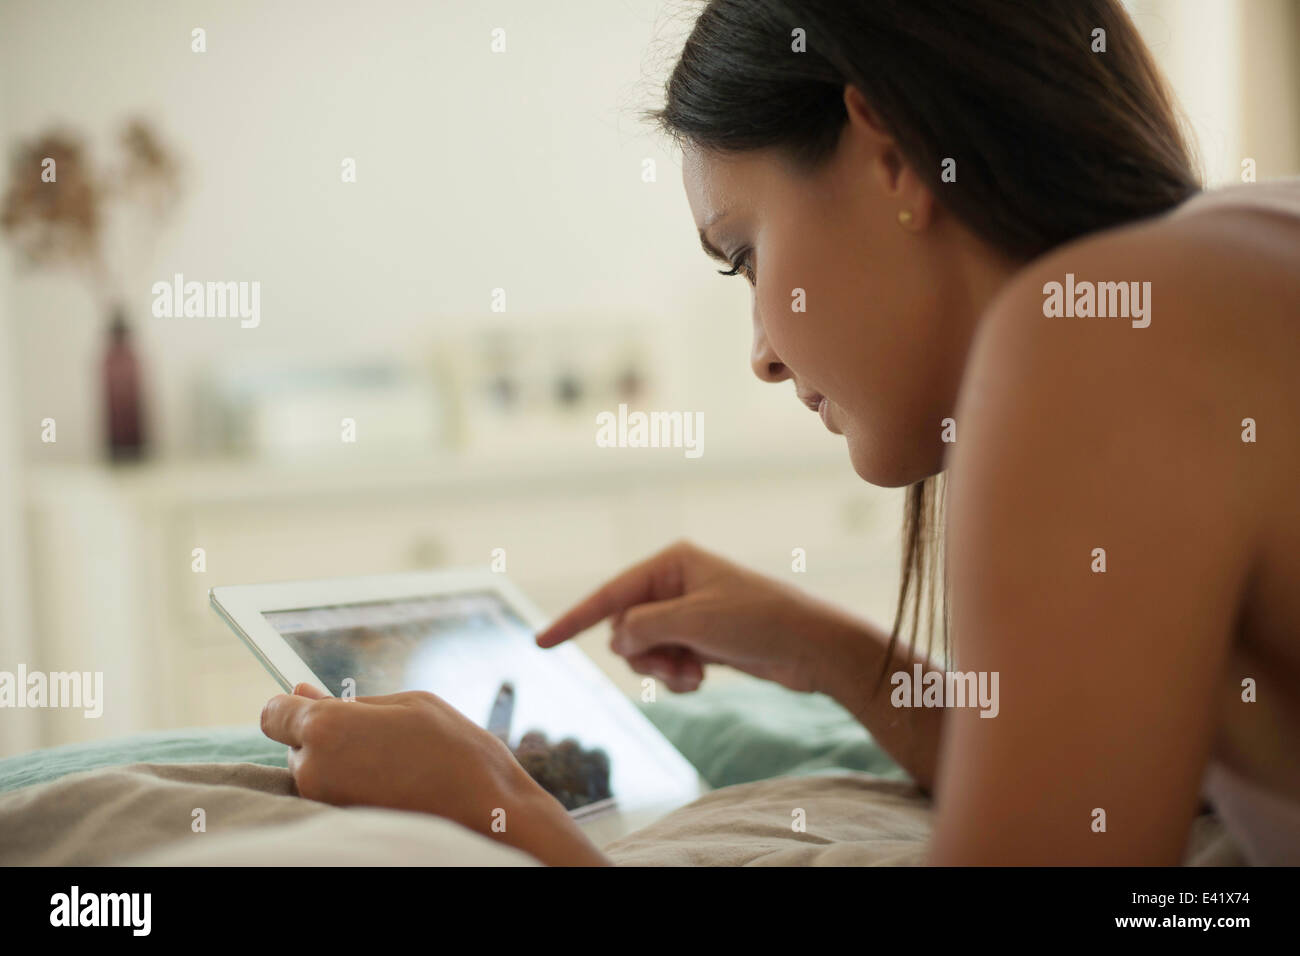 Young woman lying on bed using digital tablet Stock Photo